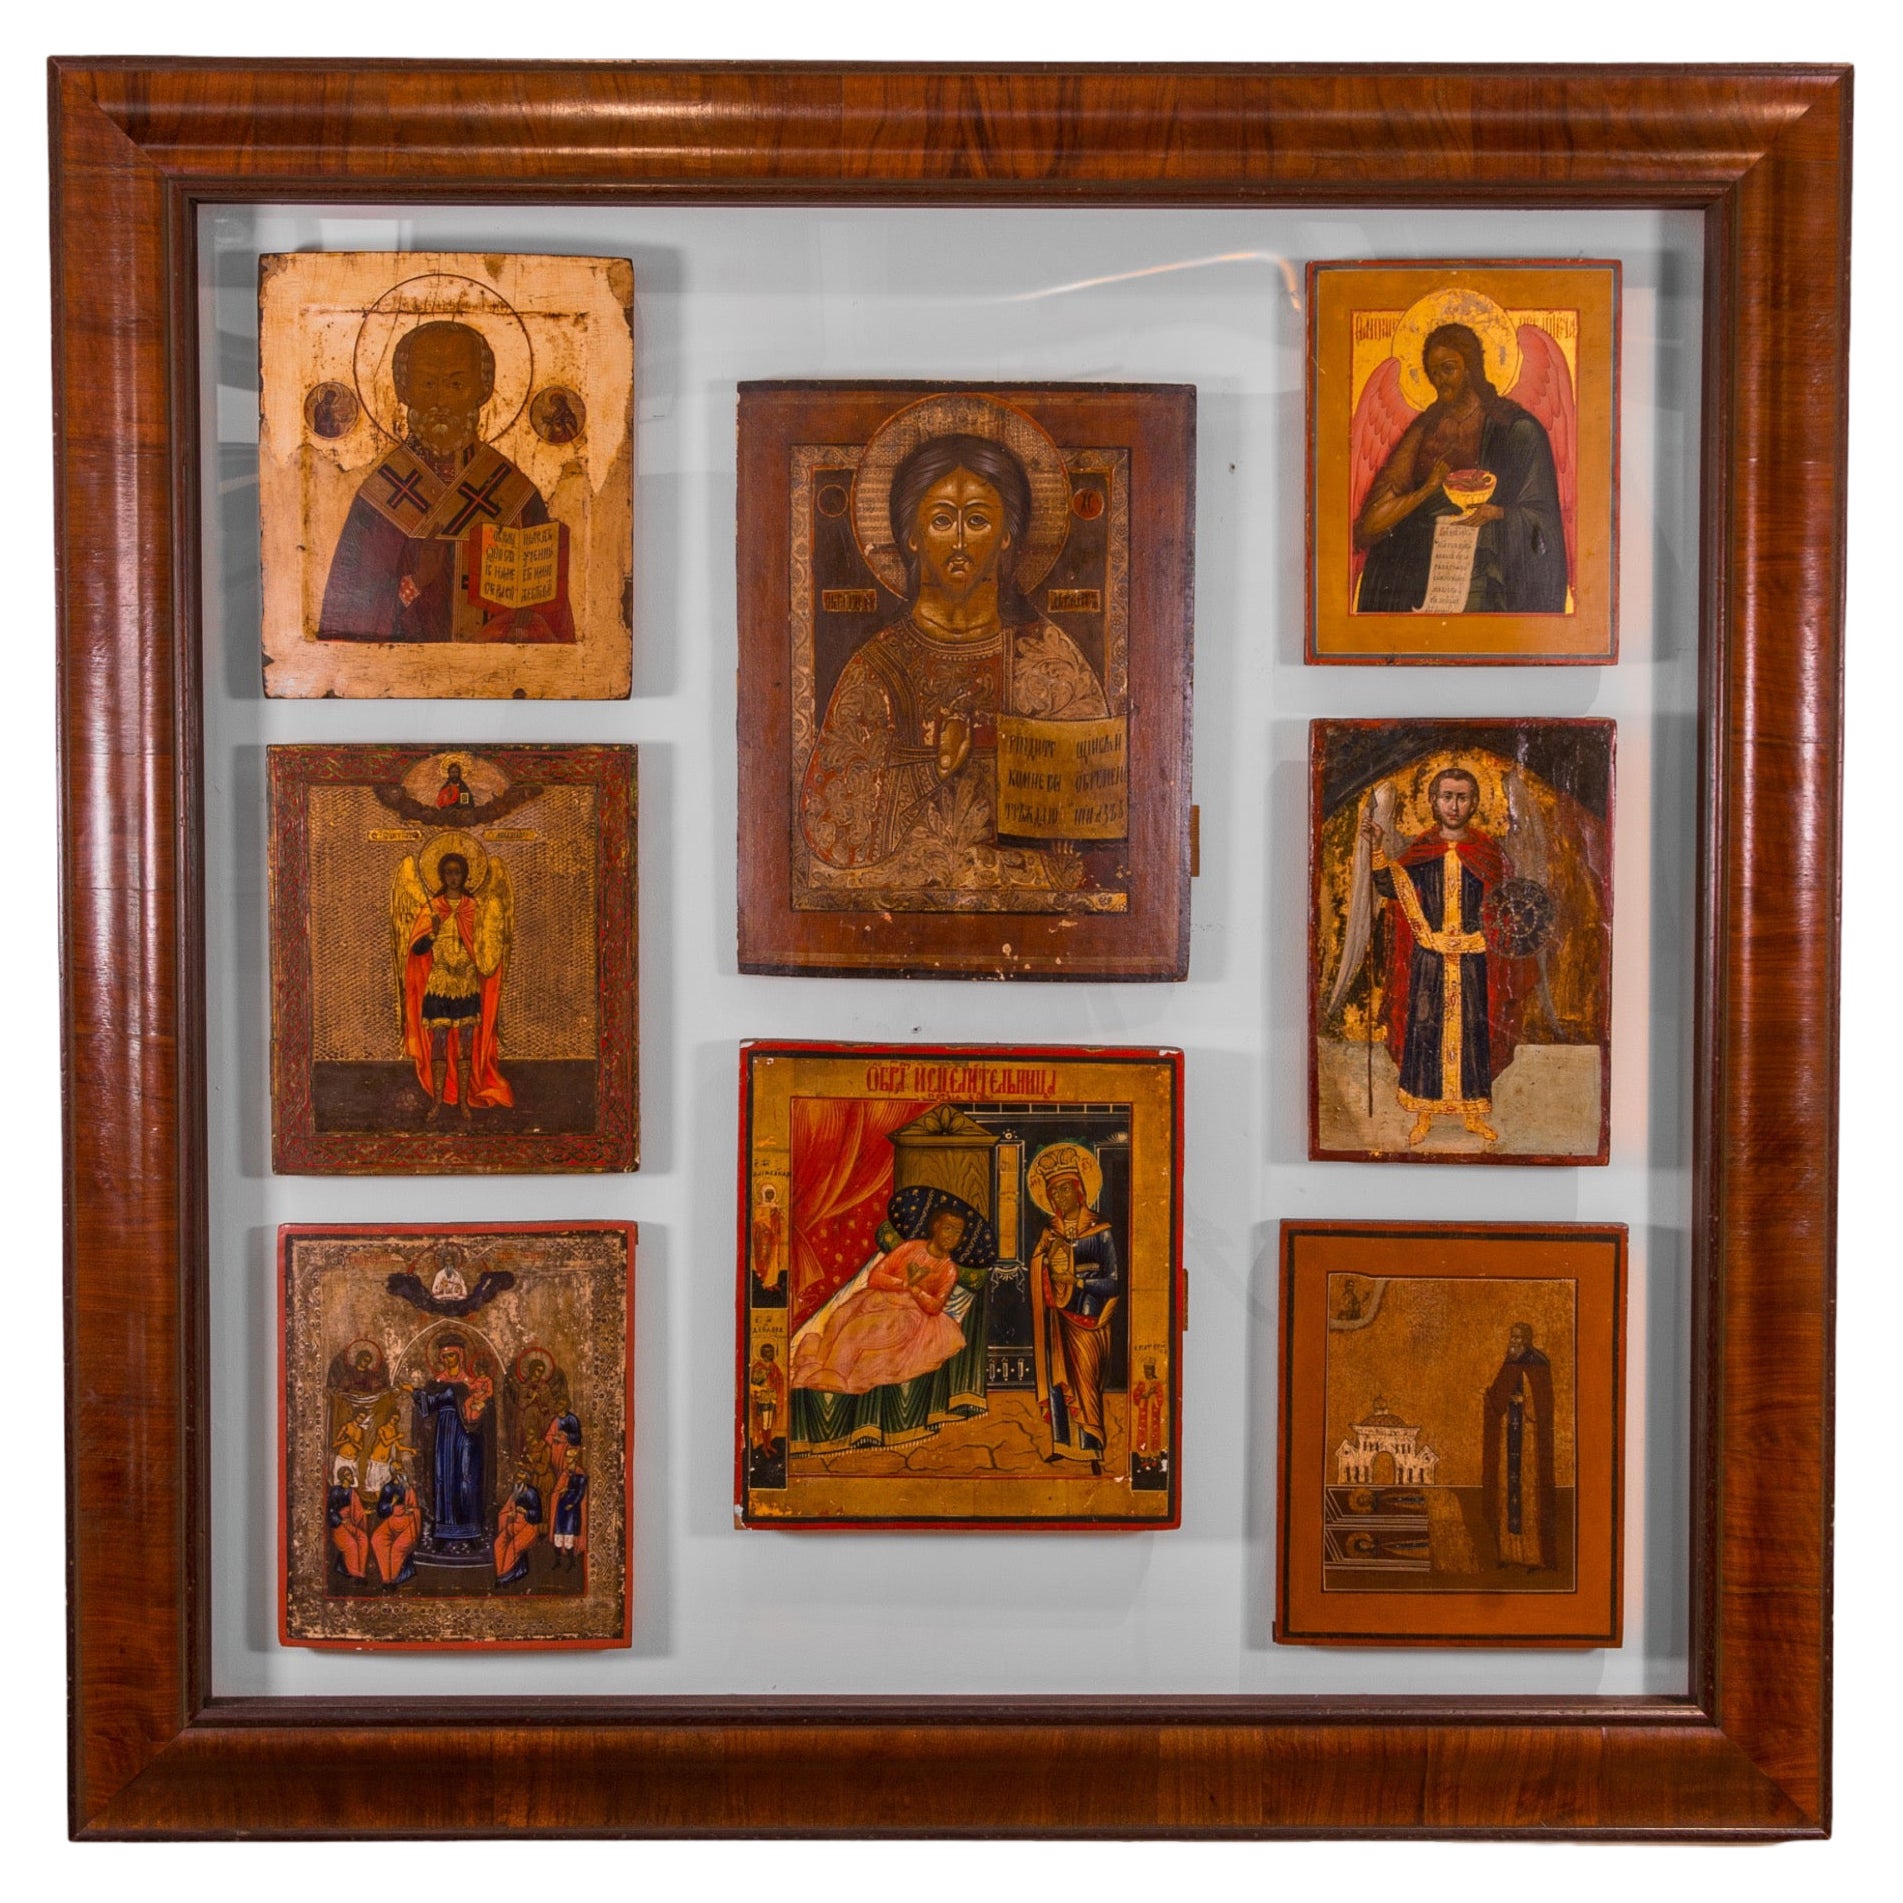 Group of Eight Russian and Greek Orthodox Icons, 17th, 18th and 19th Century